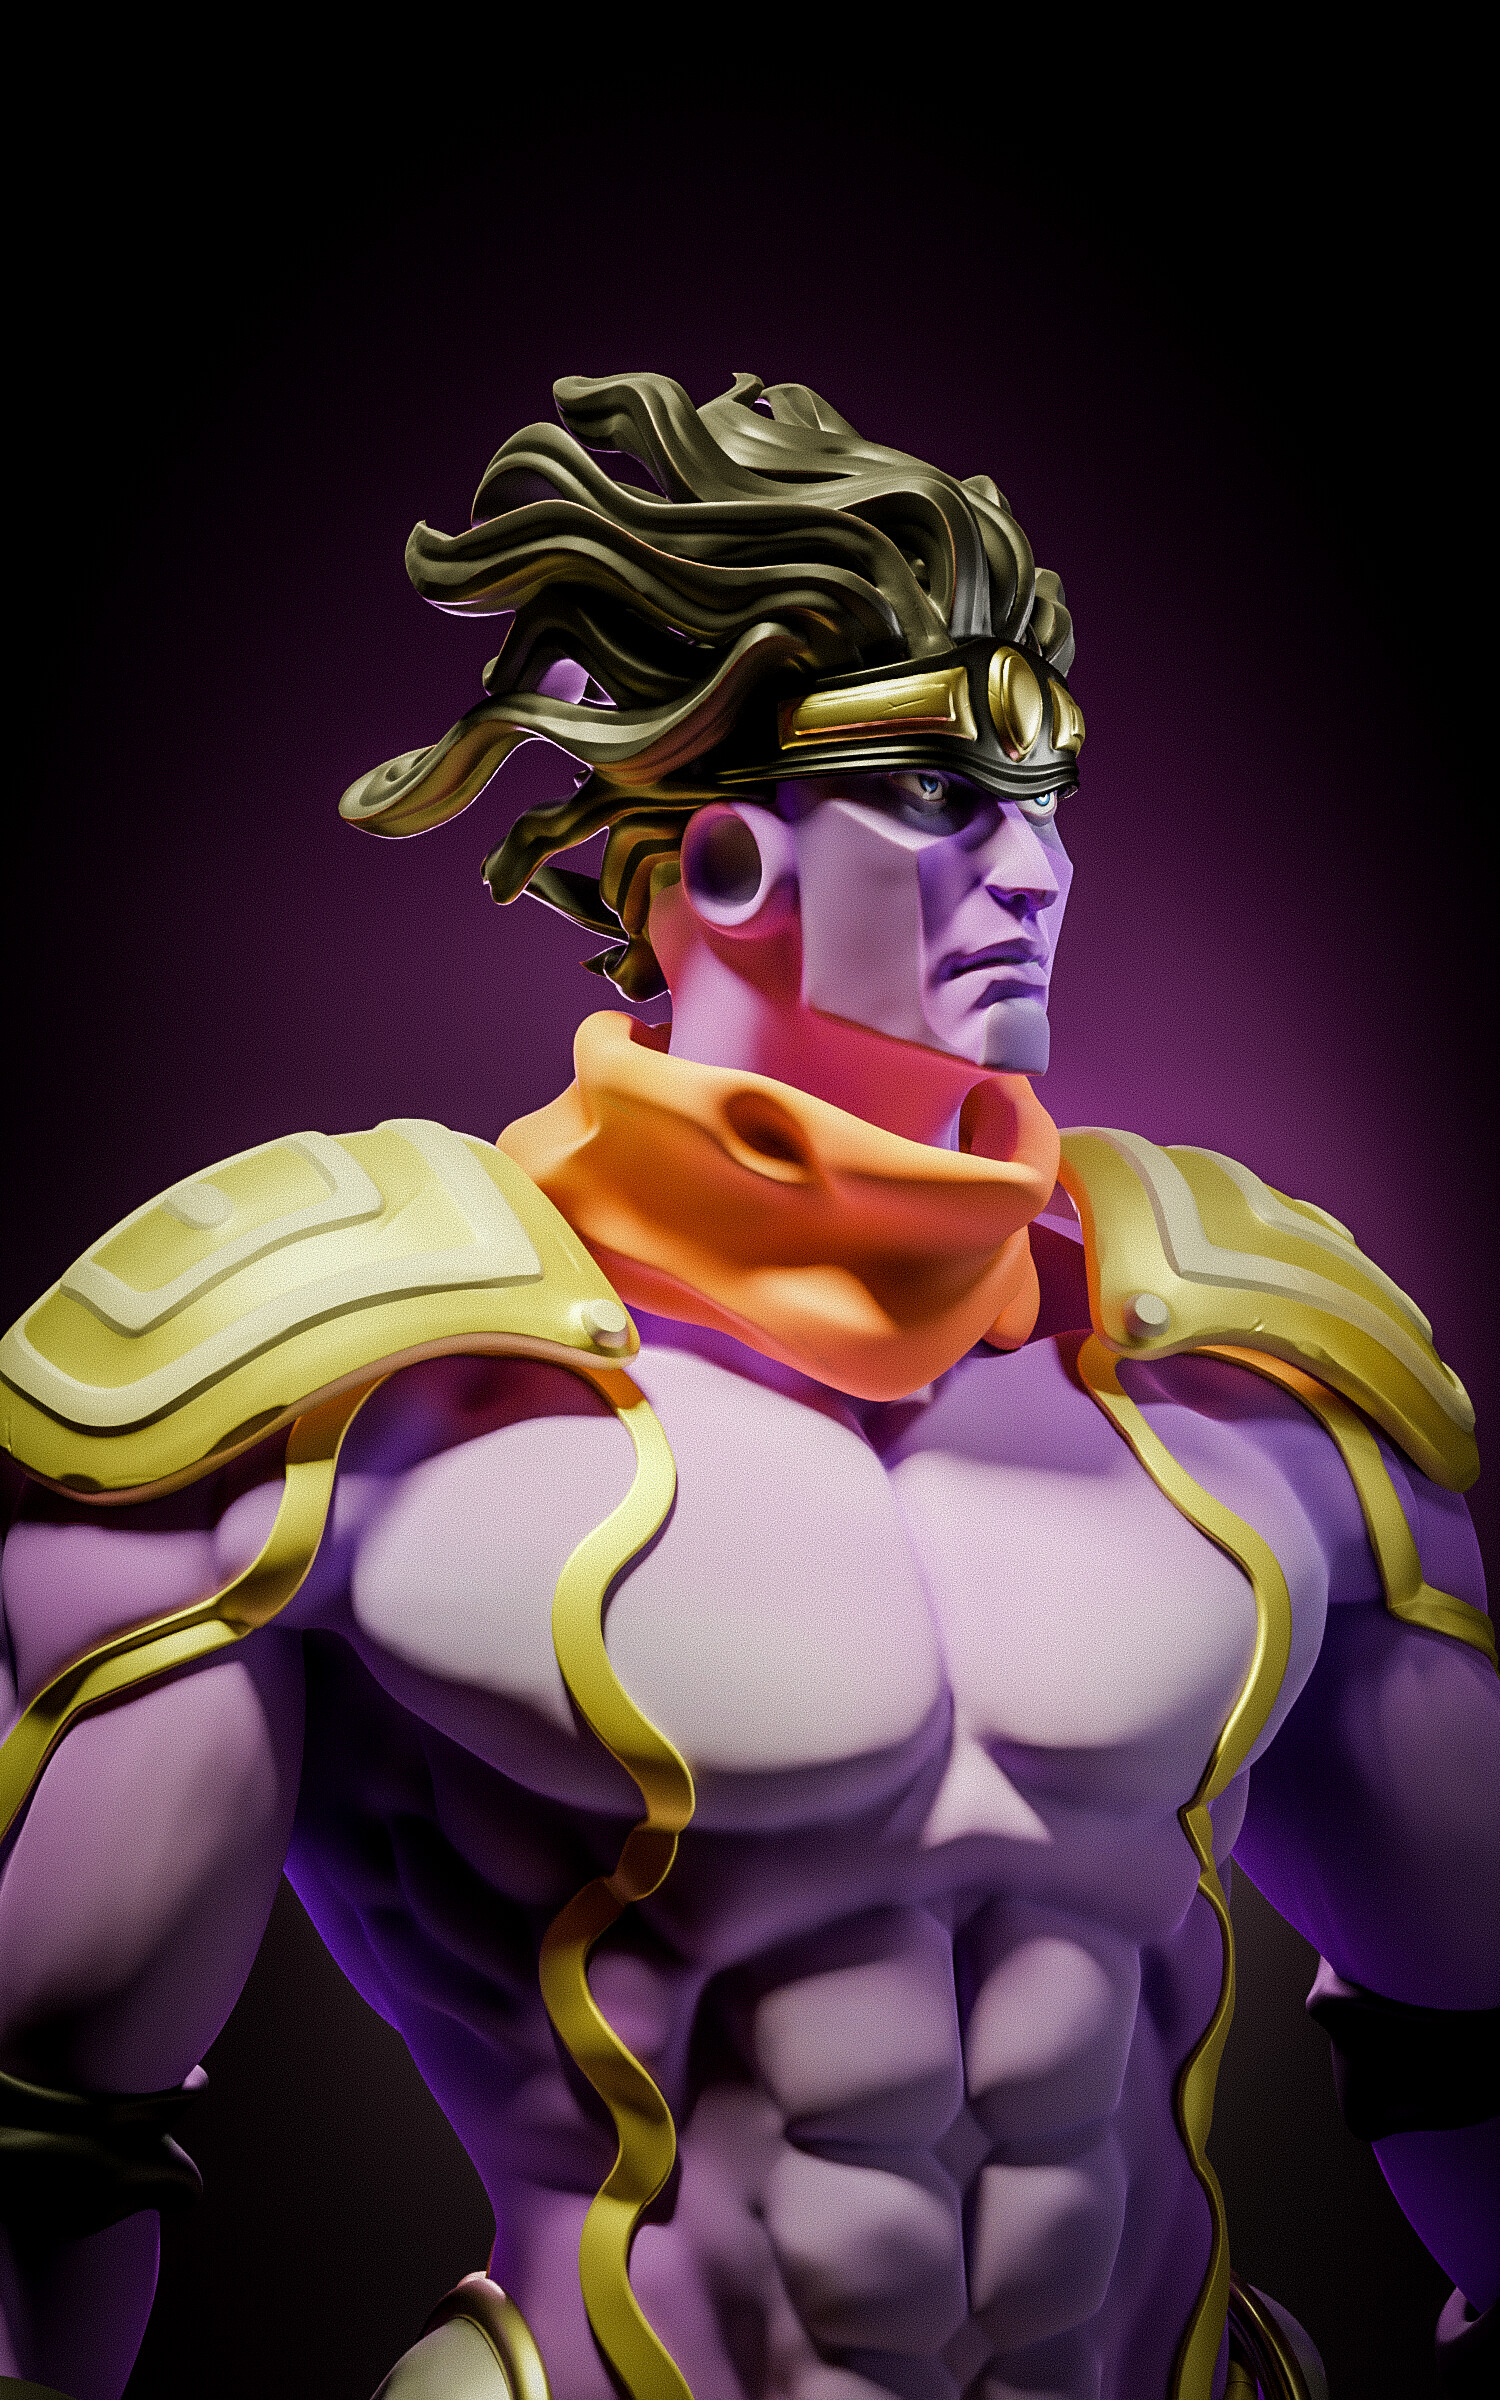 PhD in avdology — star platinum after not drawing for 10000 years